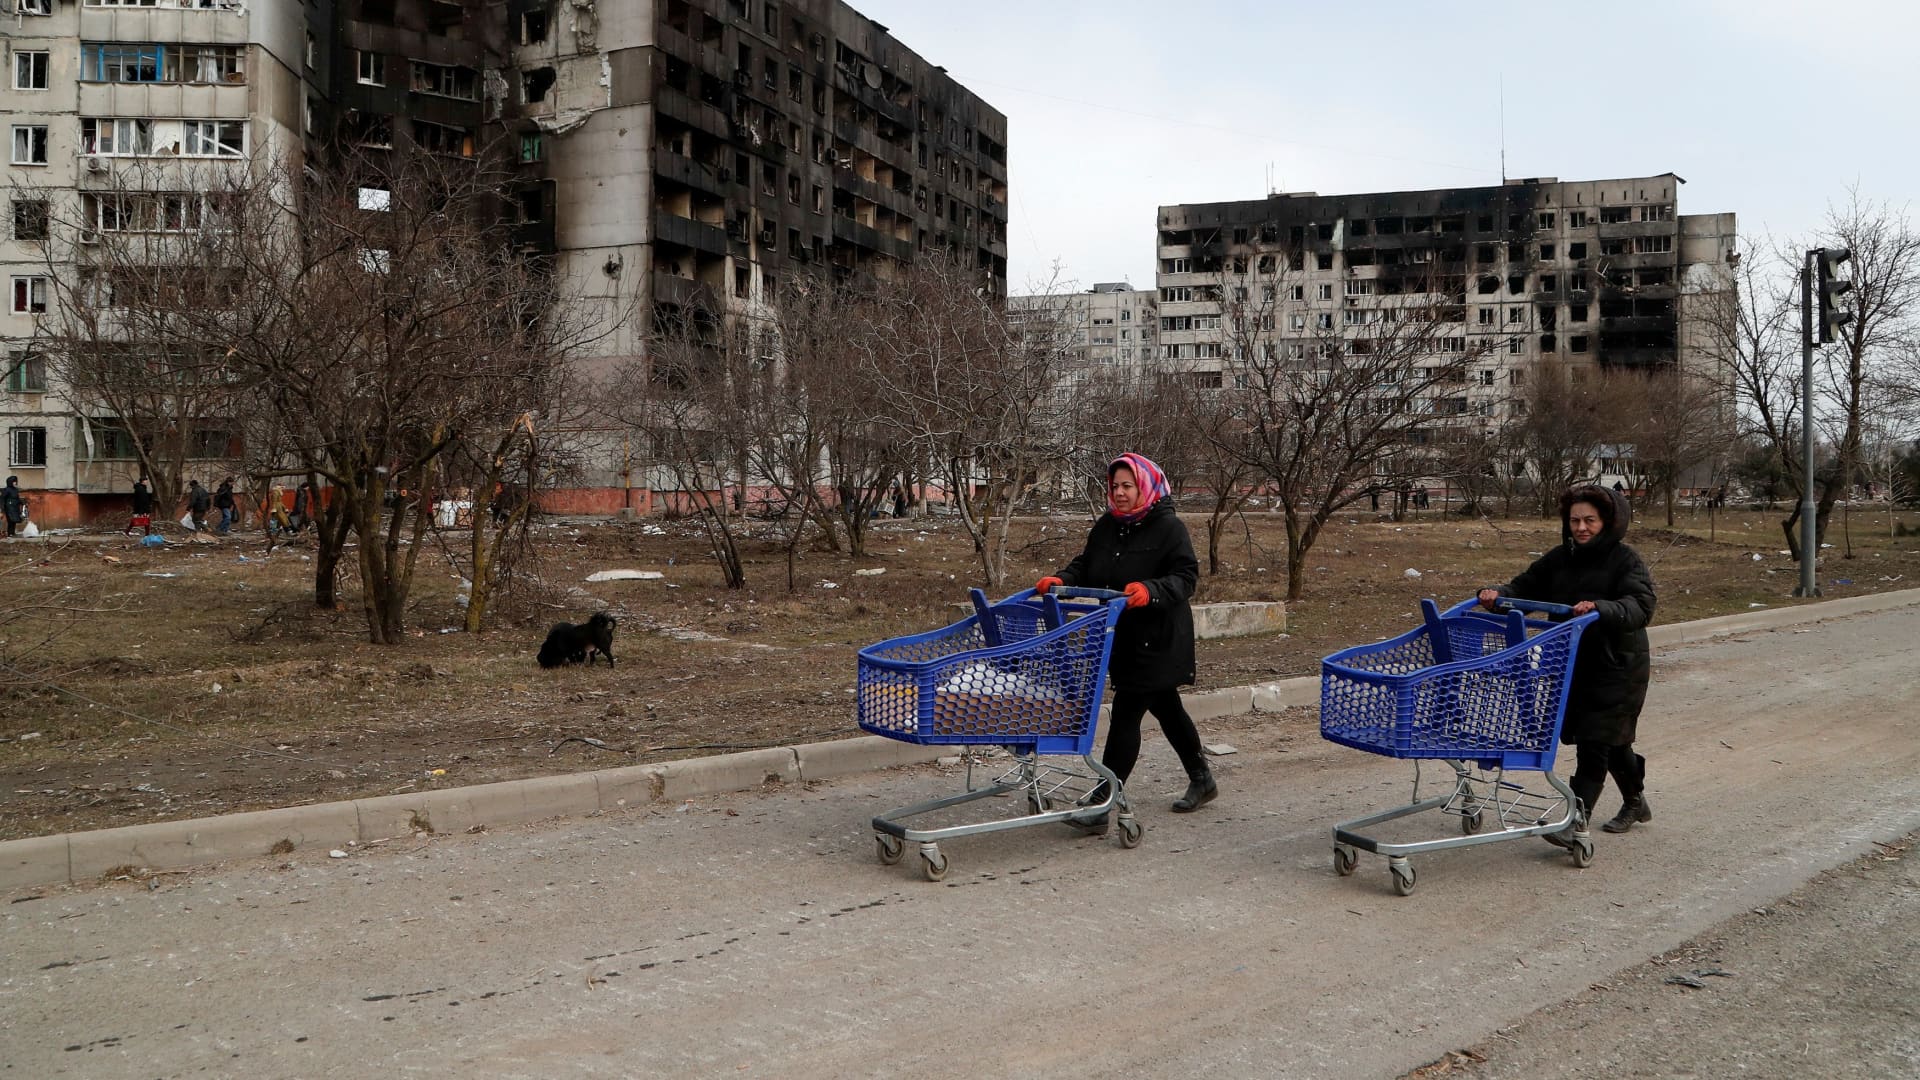 People push carts near blocks of flats, which were damaged during Ukraine-Russia conflict in the besieged southern port city of Mariupol, Ukraine March 17, 2022.